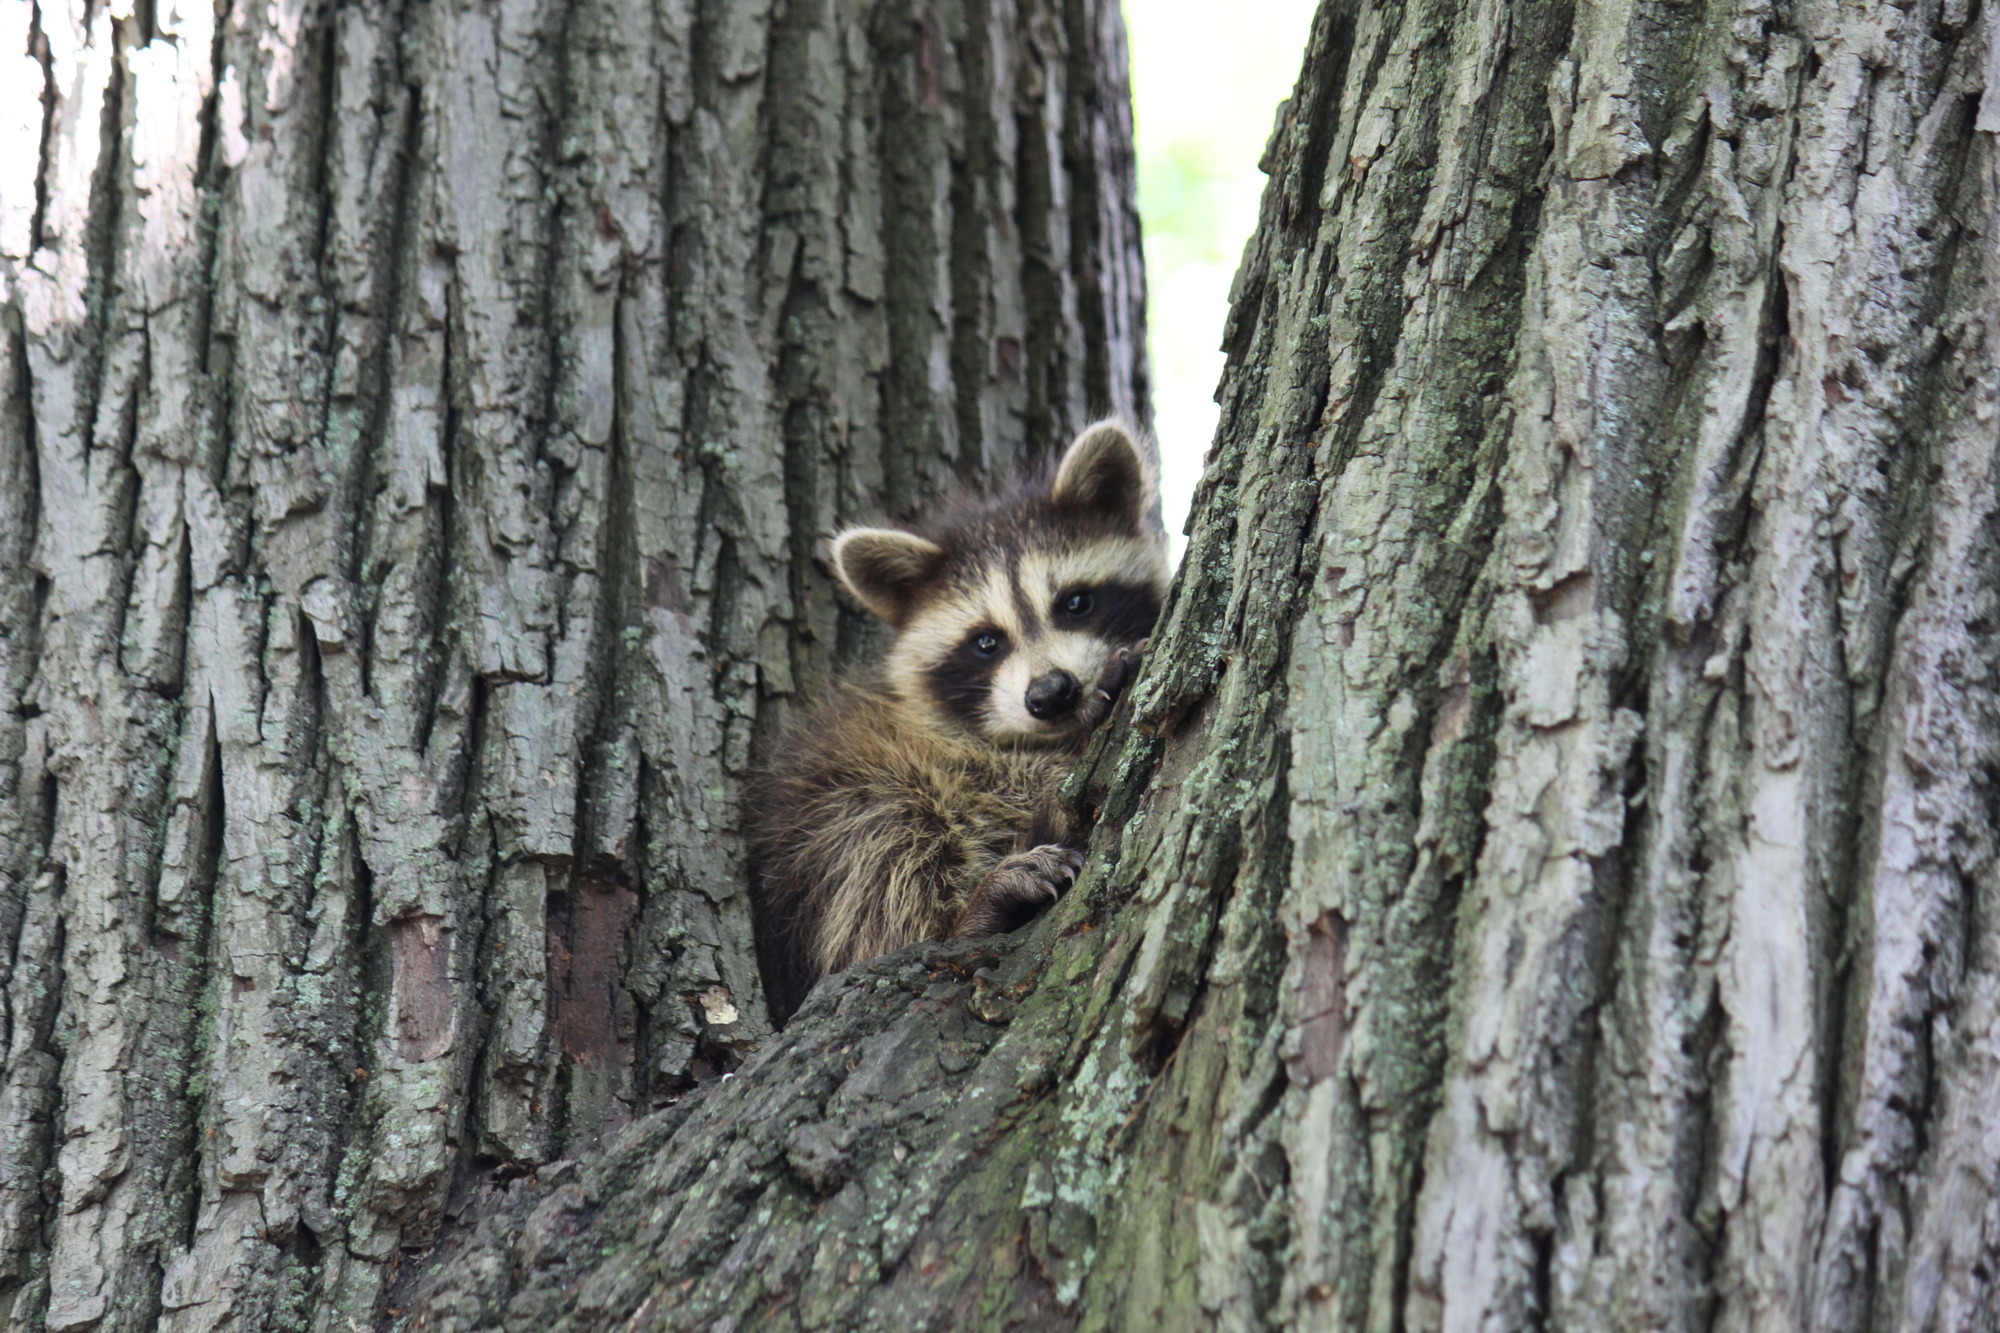 A small raccoon in a tree.